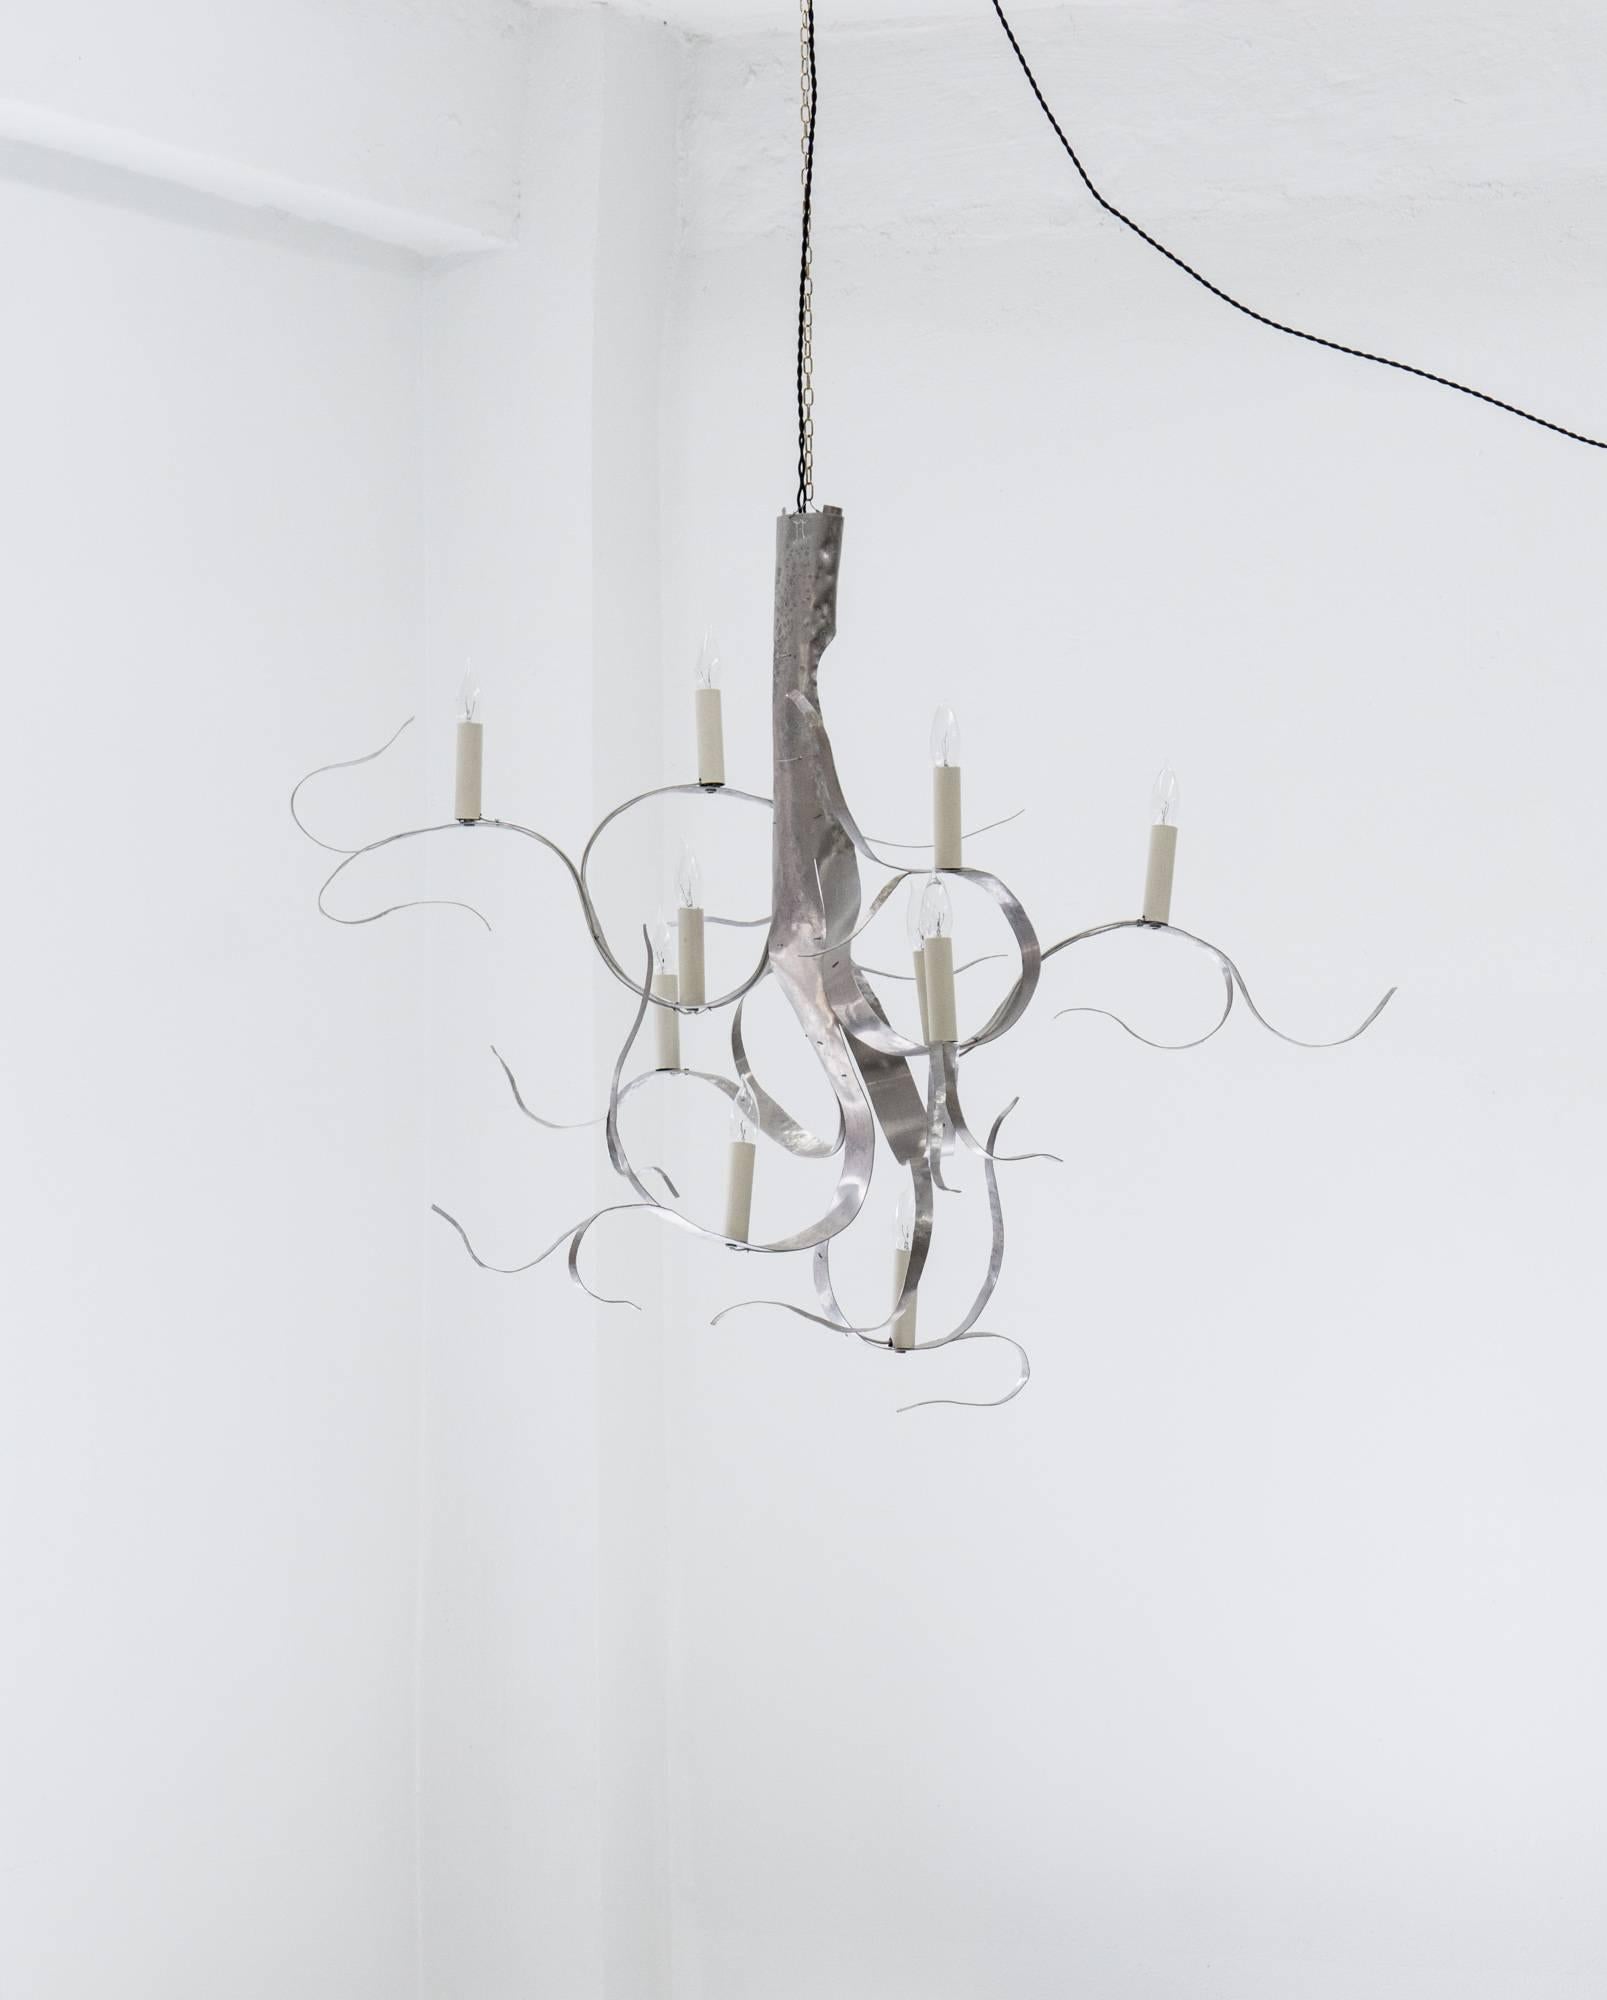 Inspired by Karl Blossfeldt’s photographs of flora, this 10-light chandelier is cut from one sheet of aluminum, then twisted and hammered by hand without discarding any of the material. The work seems to be in movement, as if it were growing like